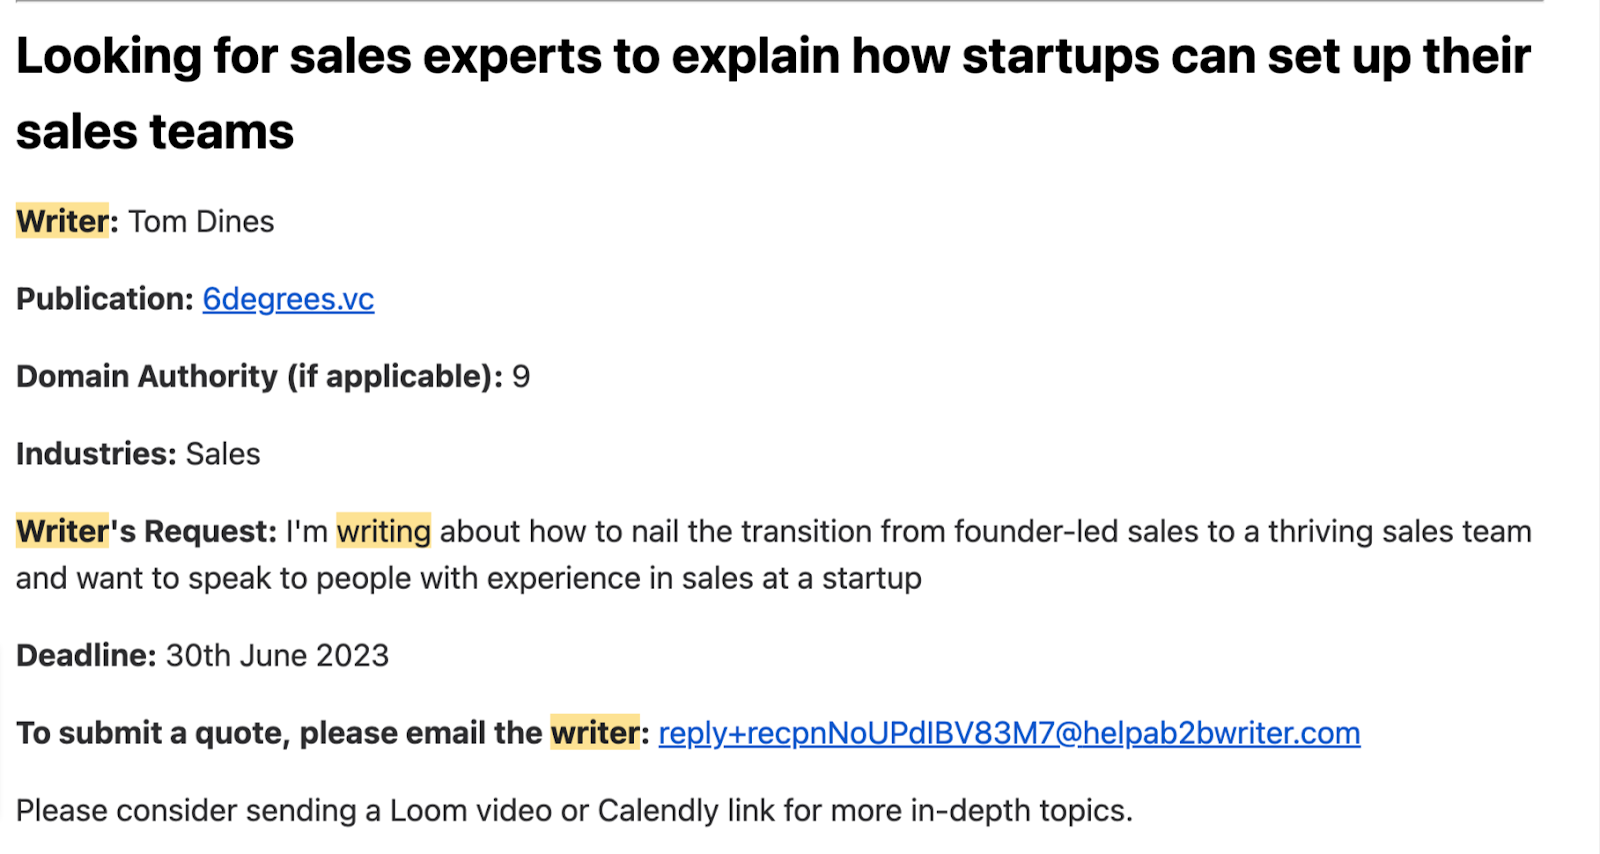 an example of Help a B2B Writer’s query looking for sales experts to explain how startups can set up their sales teams